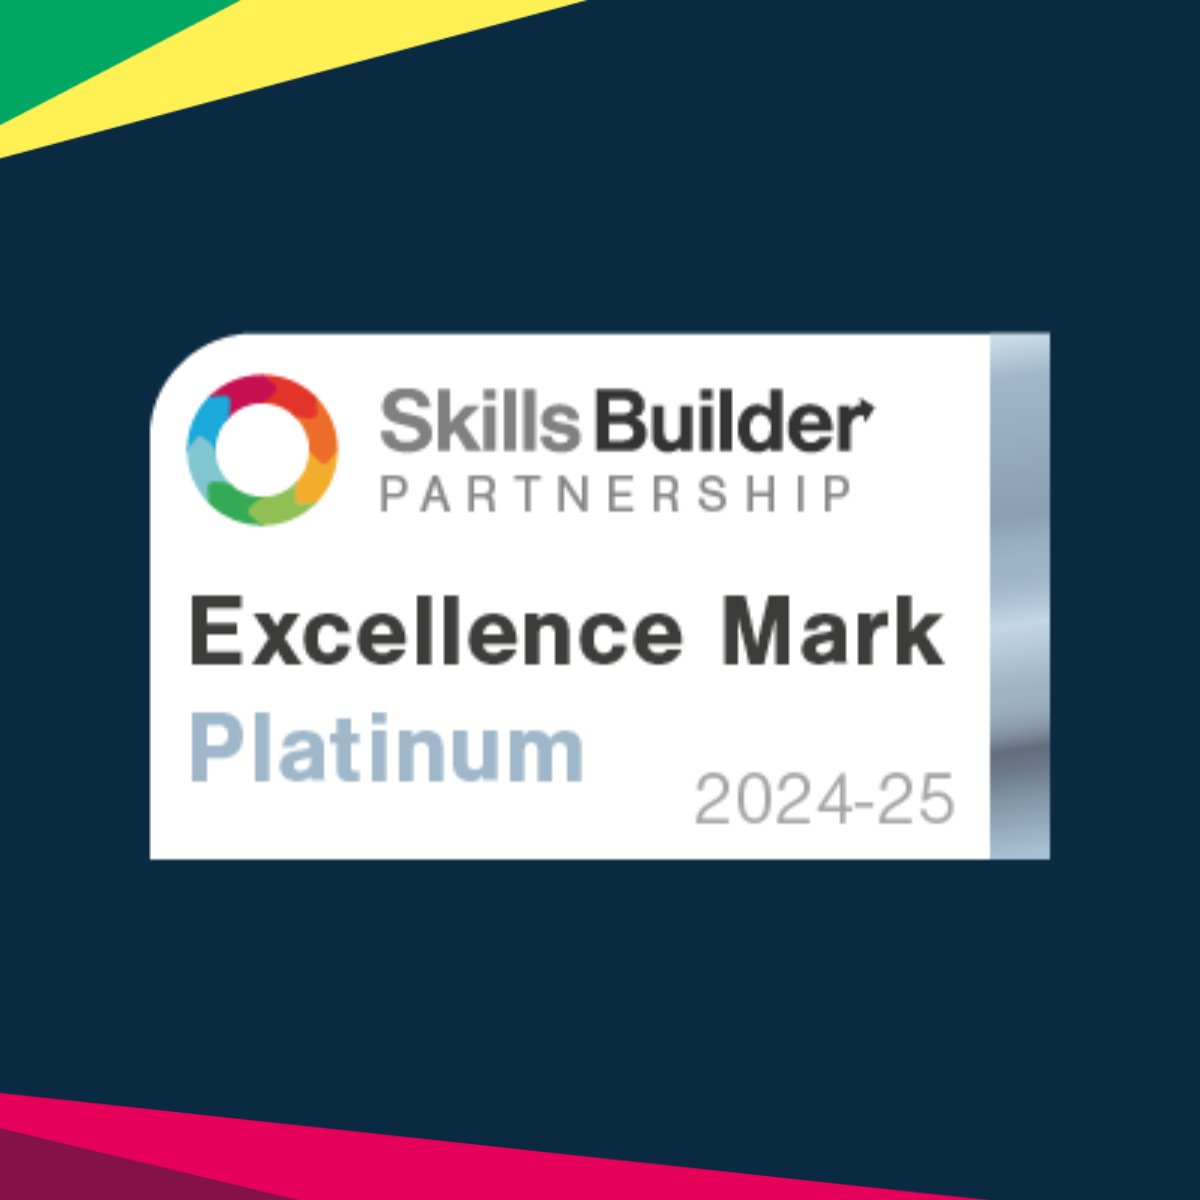 We are delighted to feature in @Skills_Builder's Essential Skills In Business, showcasing the work we’ve achieved together to introduce a competency framework to support the effective development of essential skills for our team. skillsbuilder.org/essential-skil…